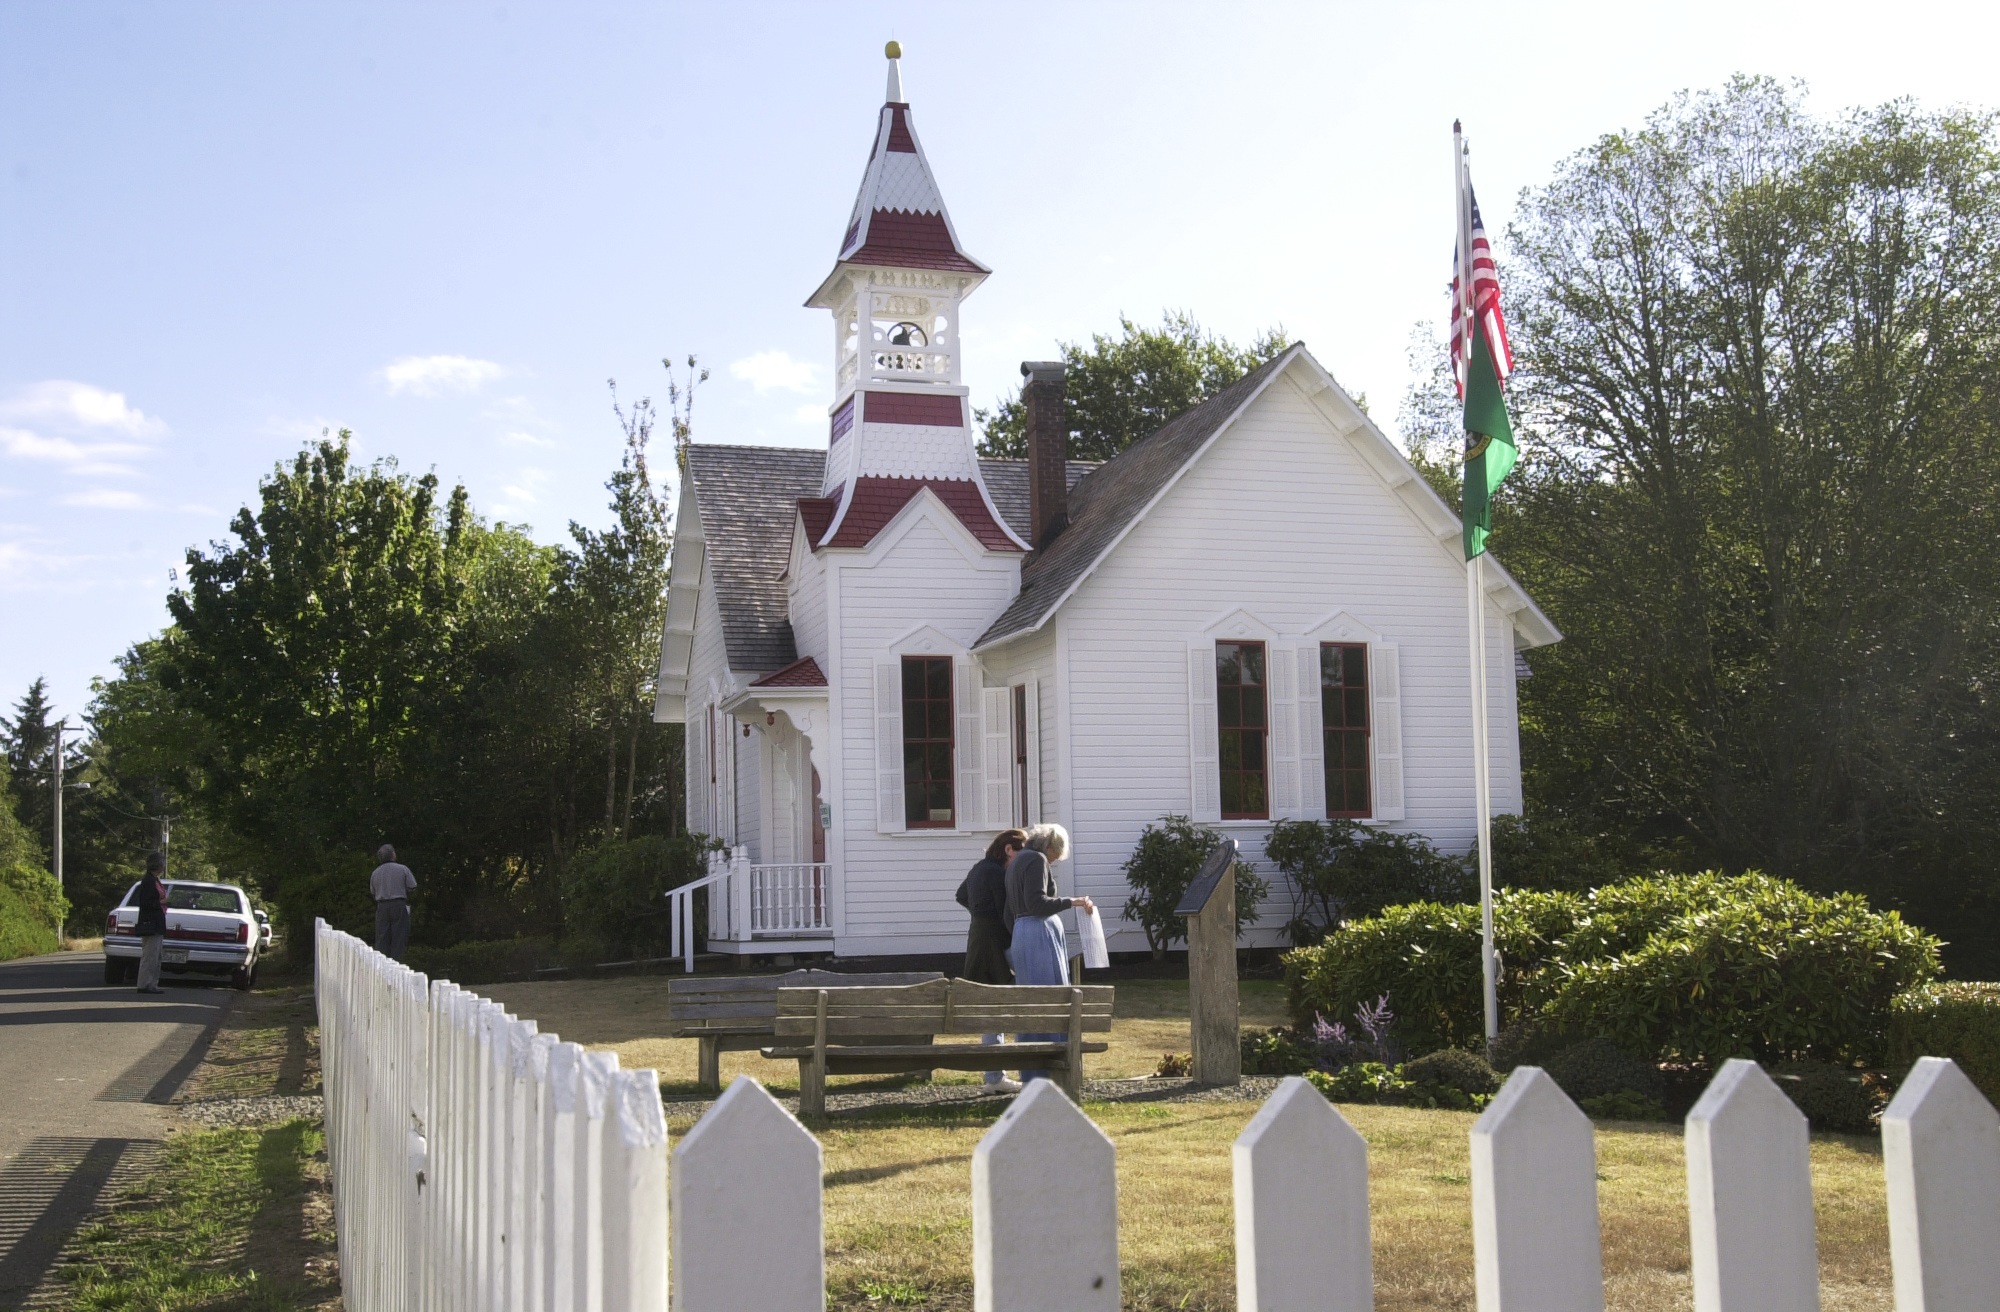 The historic Oysterville Church is one of the distinctive venues for the Long Beach Peninsula's Water Music Festival.